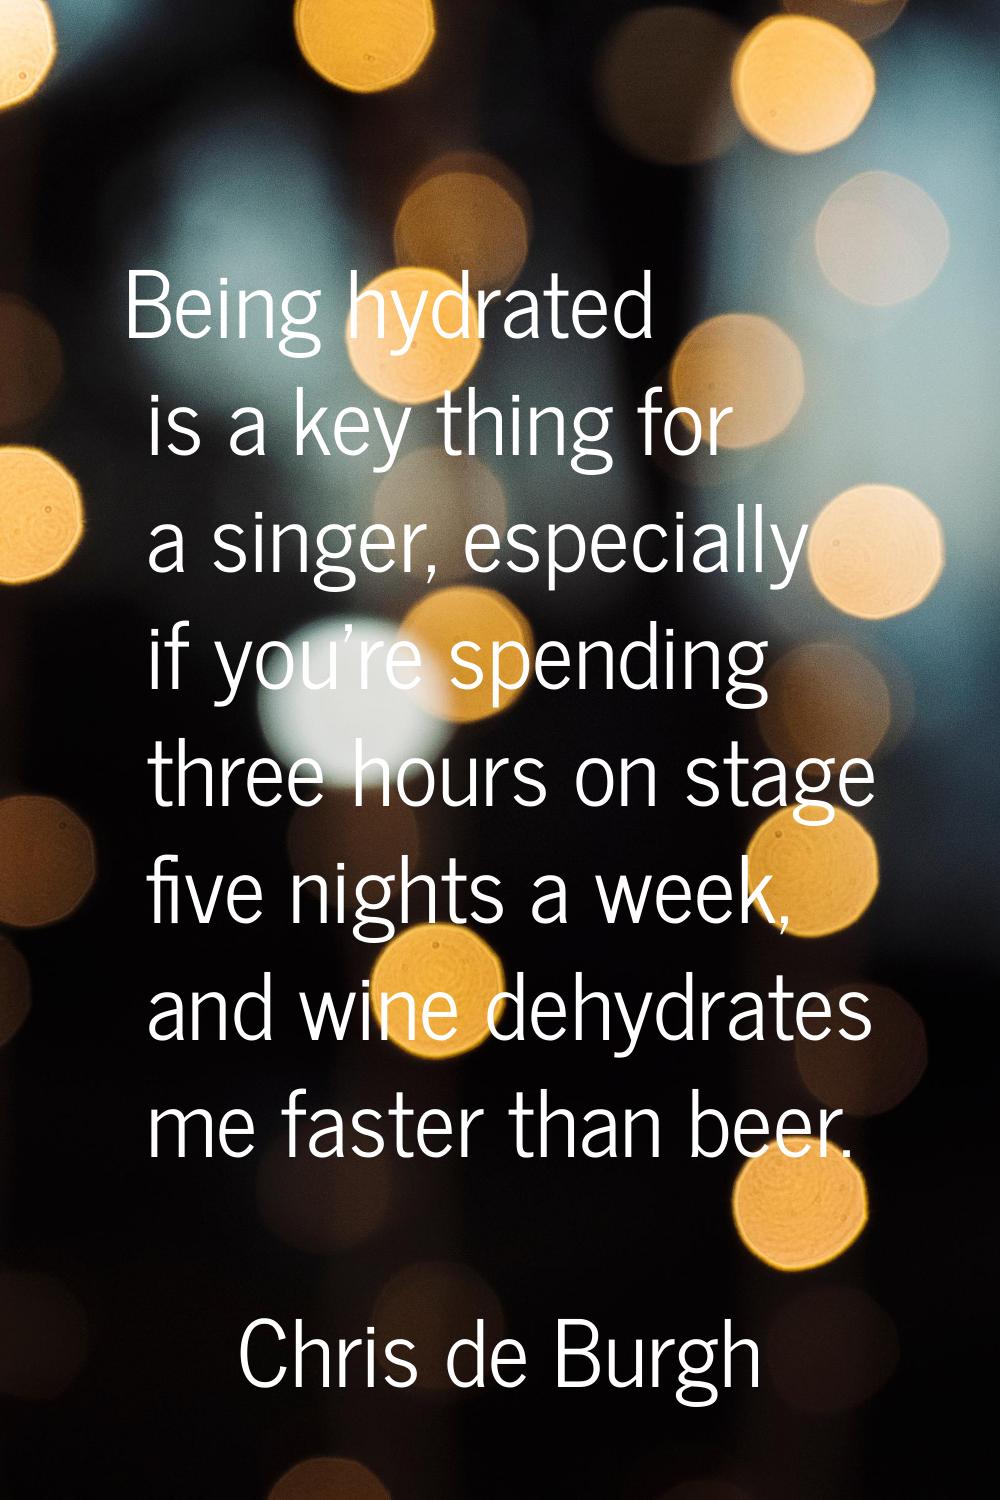 Being hydrated is a key thing for a singer, especially if you're spending three hours on stage five